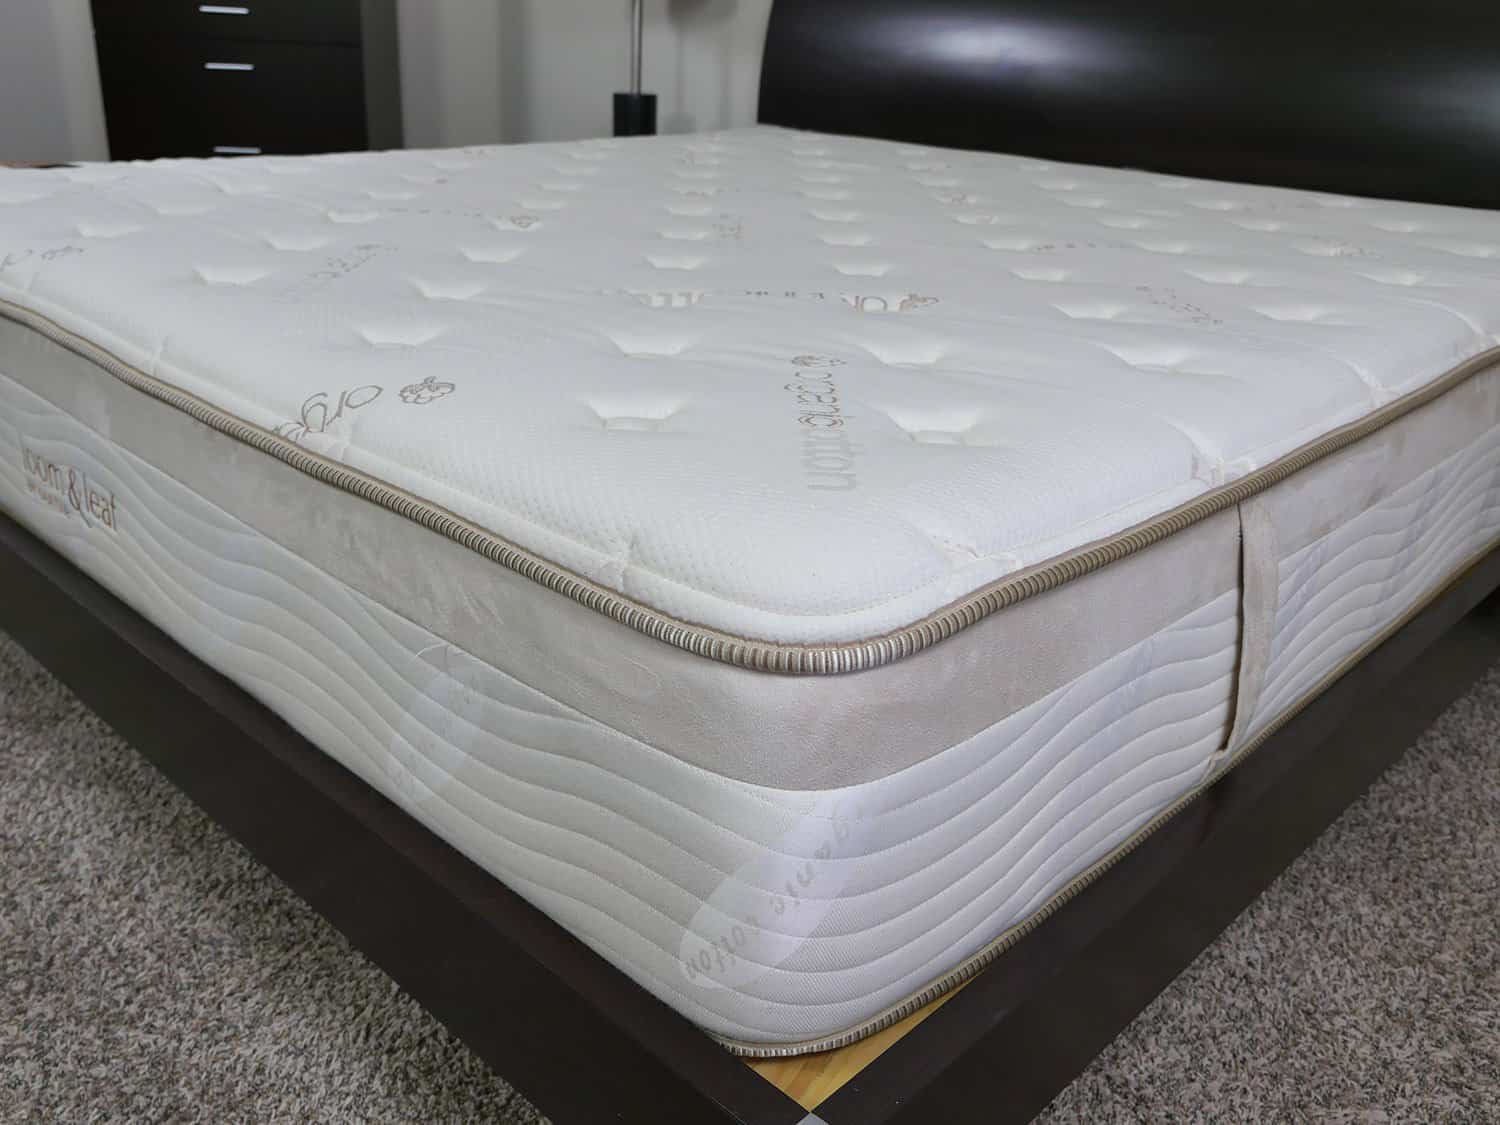 loom and leaf mattress cover